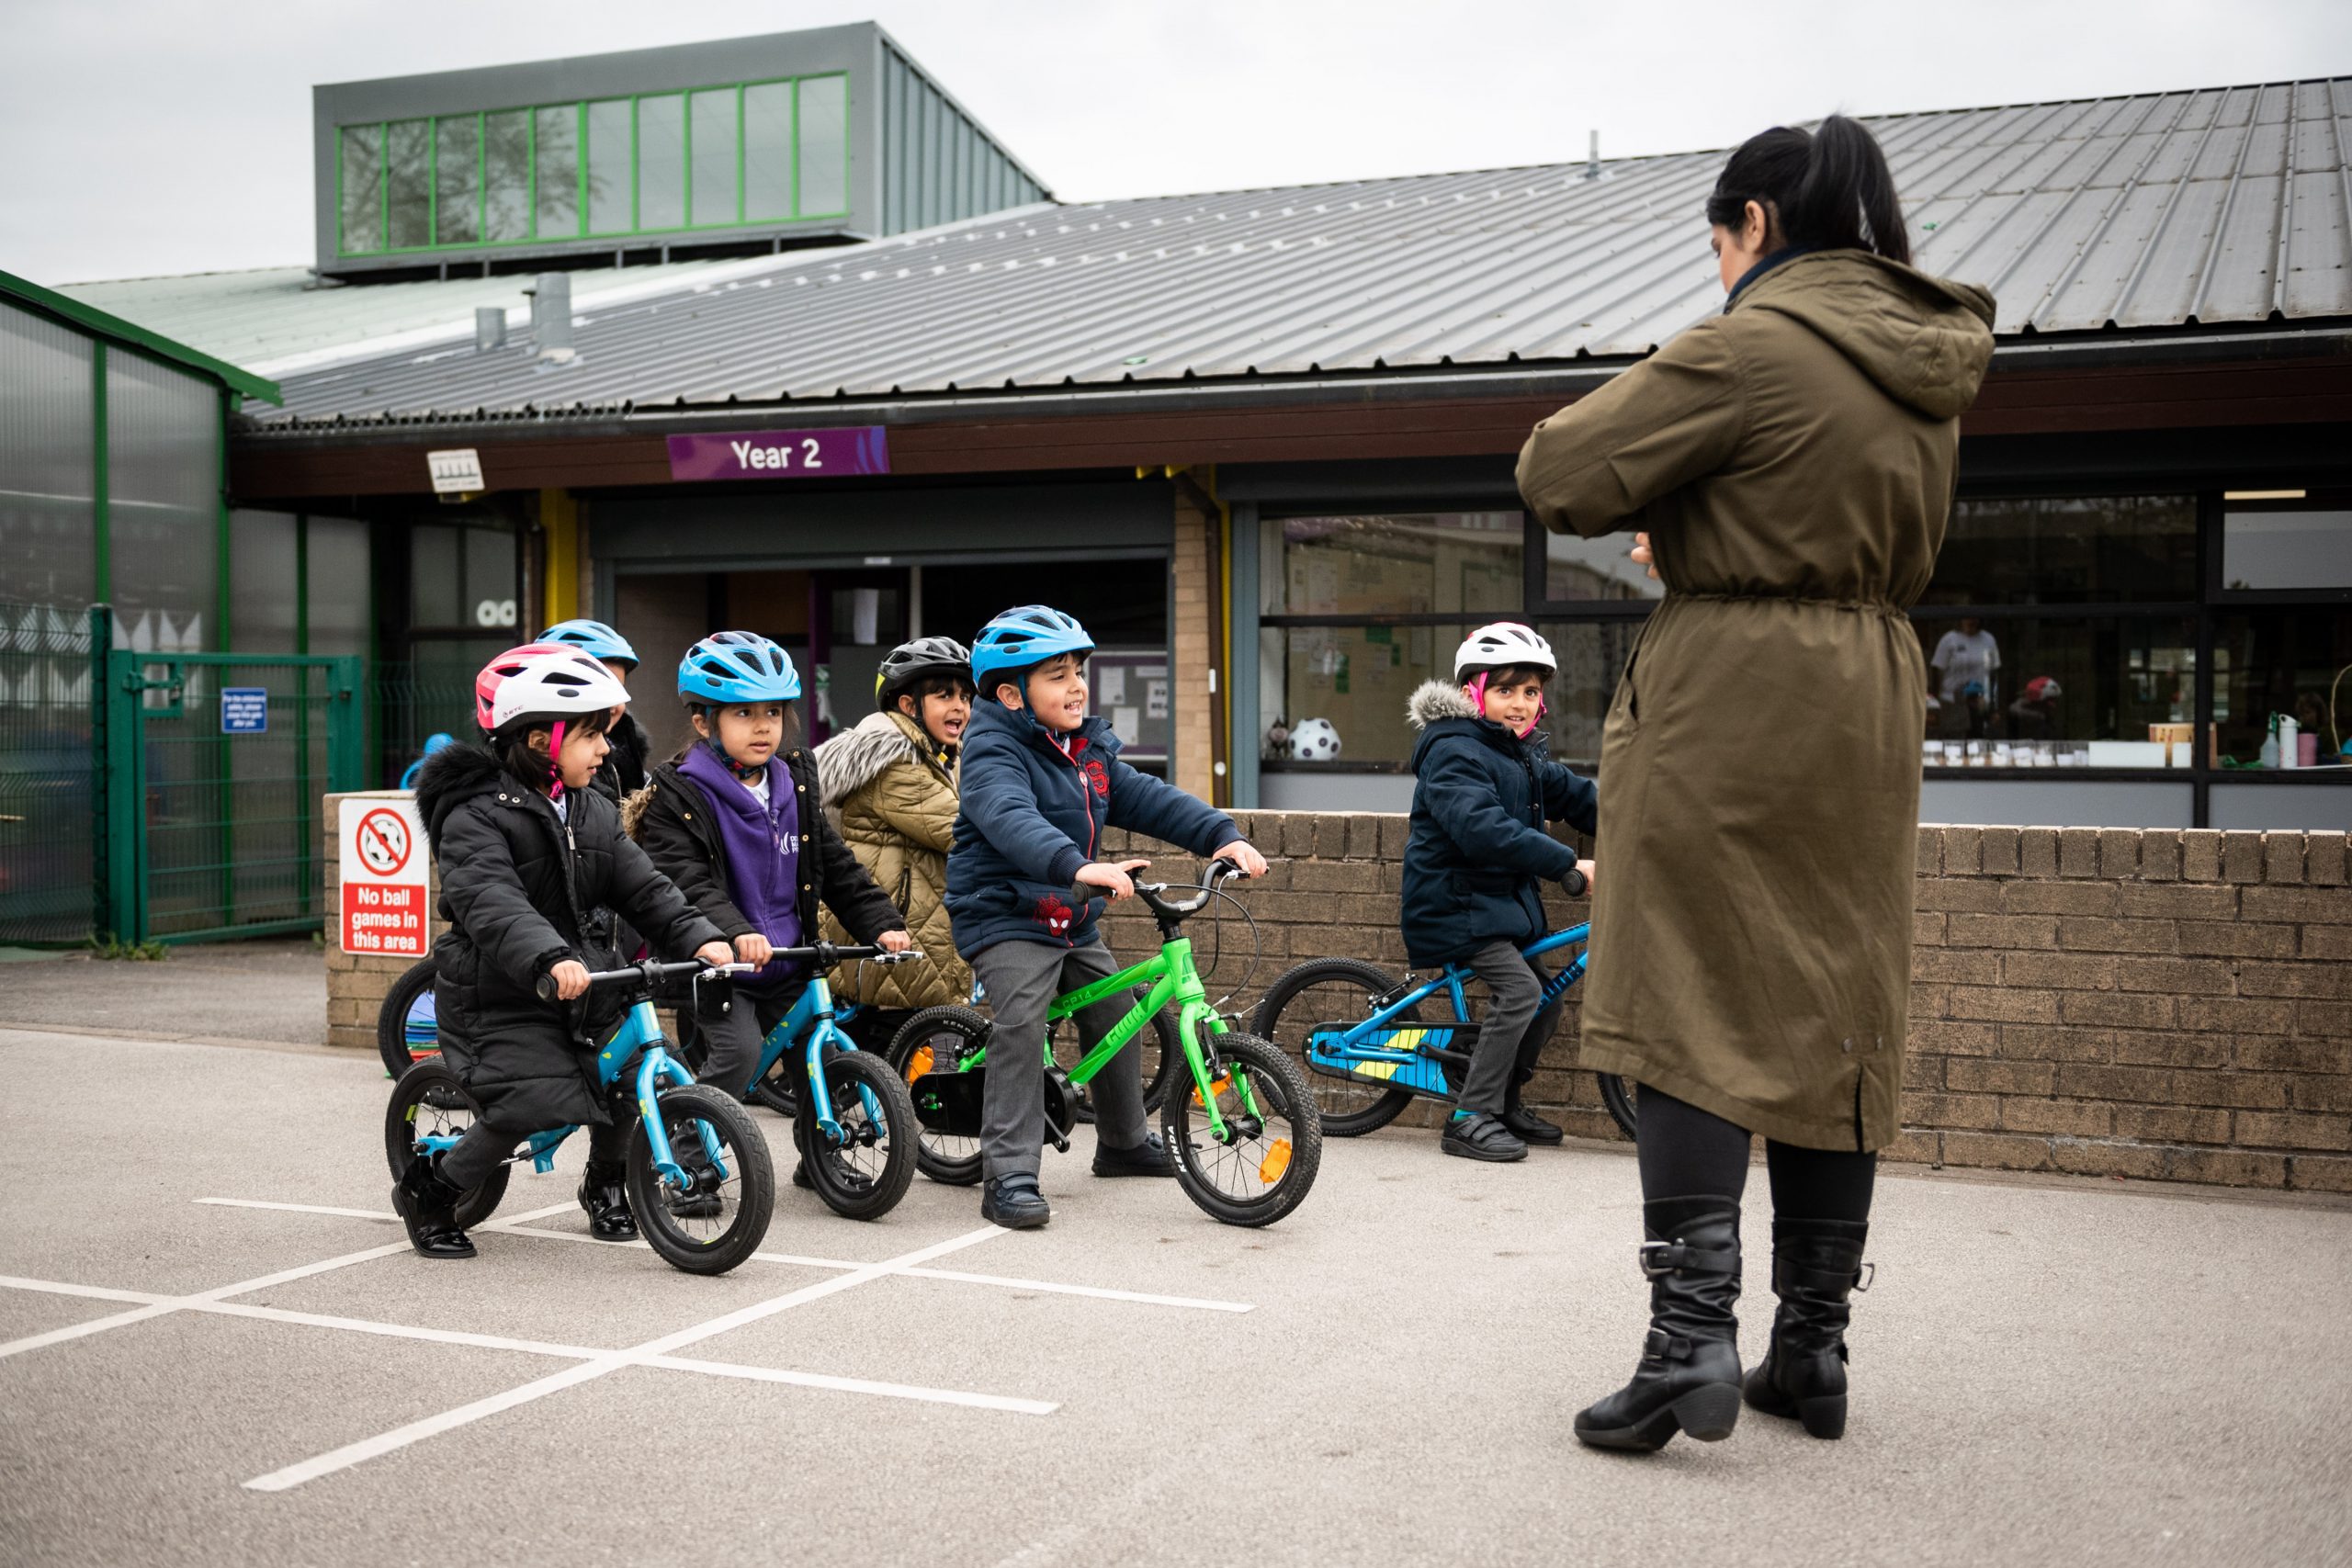 A group of five small children stand on balance bikes in a playground. A woman wearing a green parka stands with her back to the camera, teaching them.